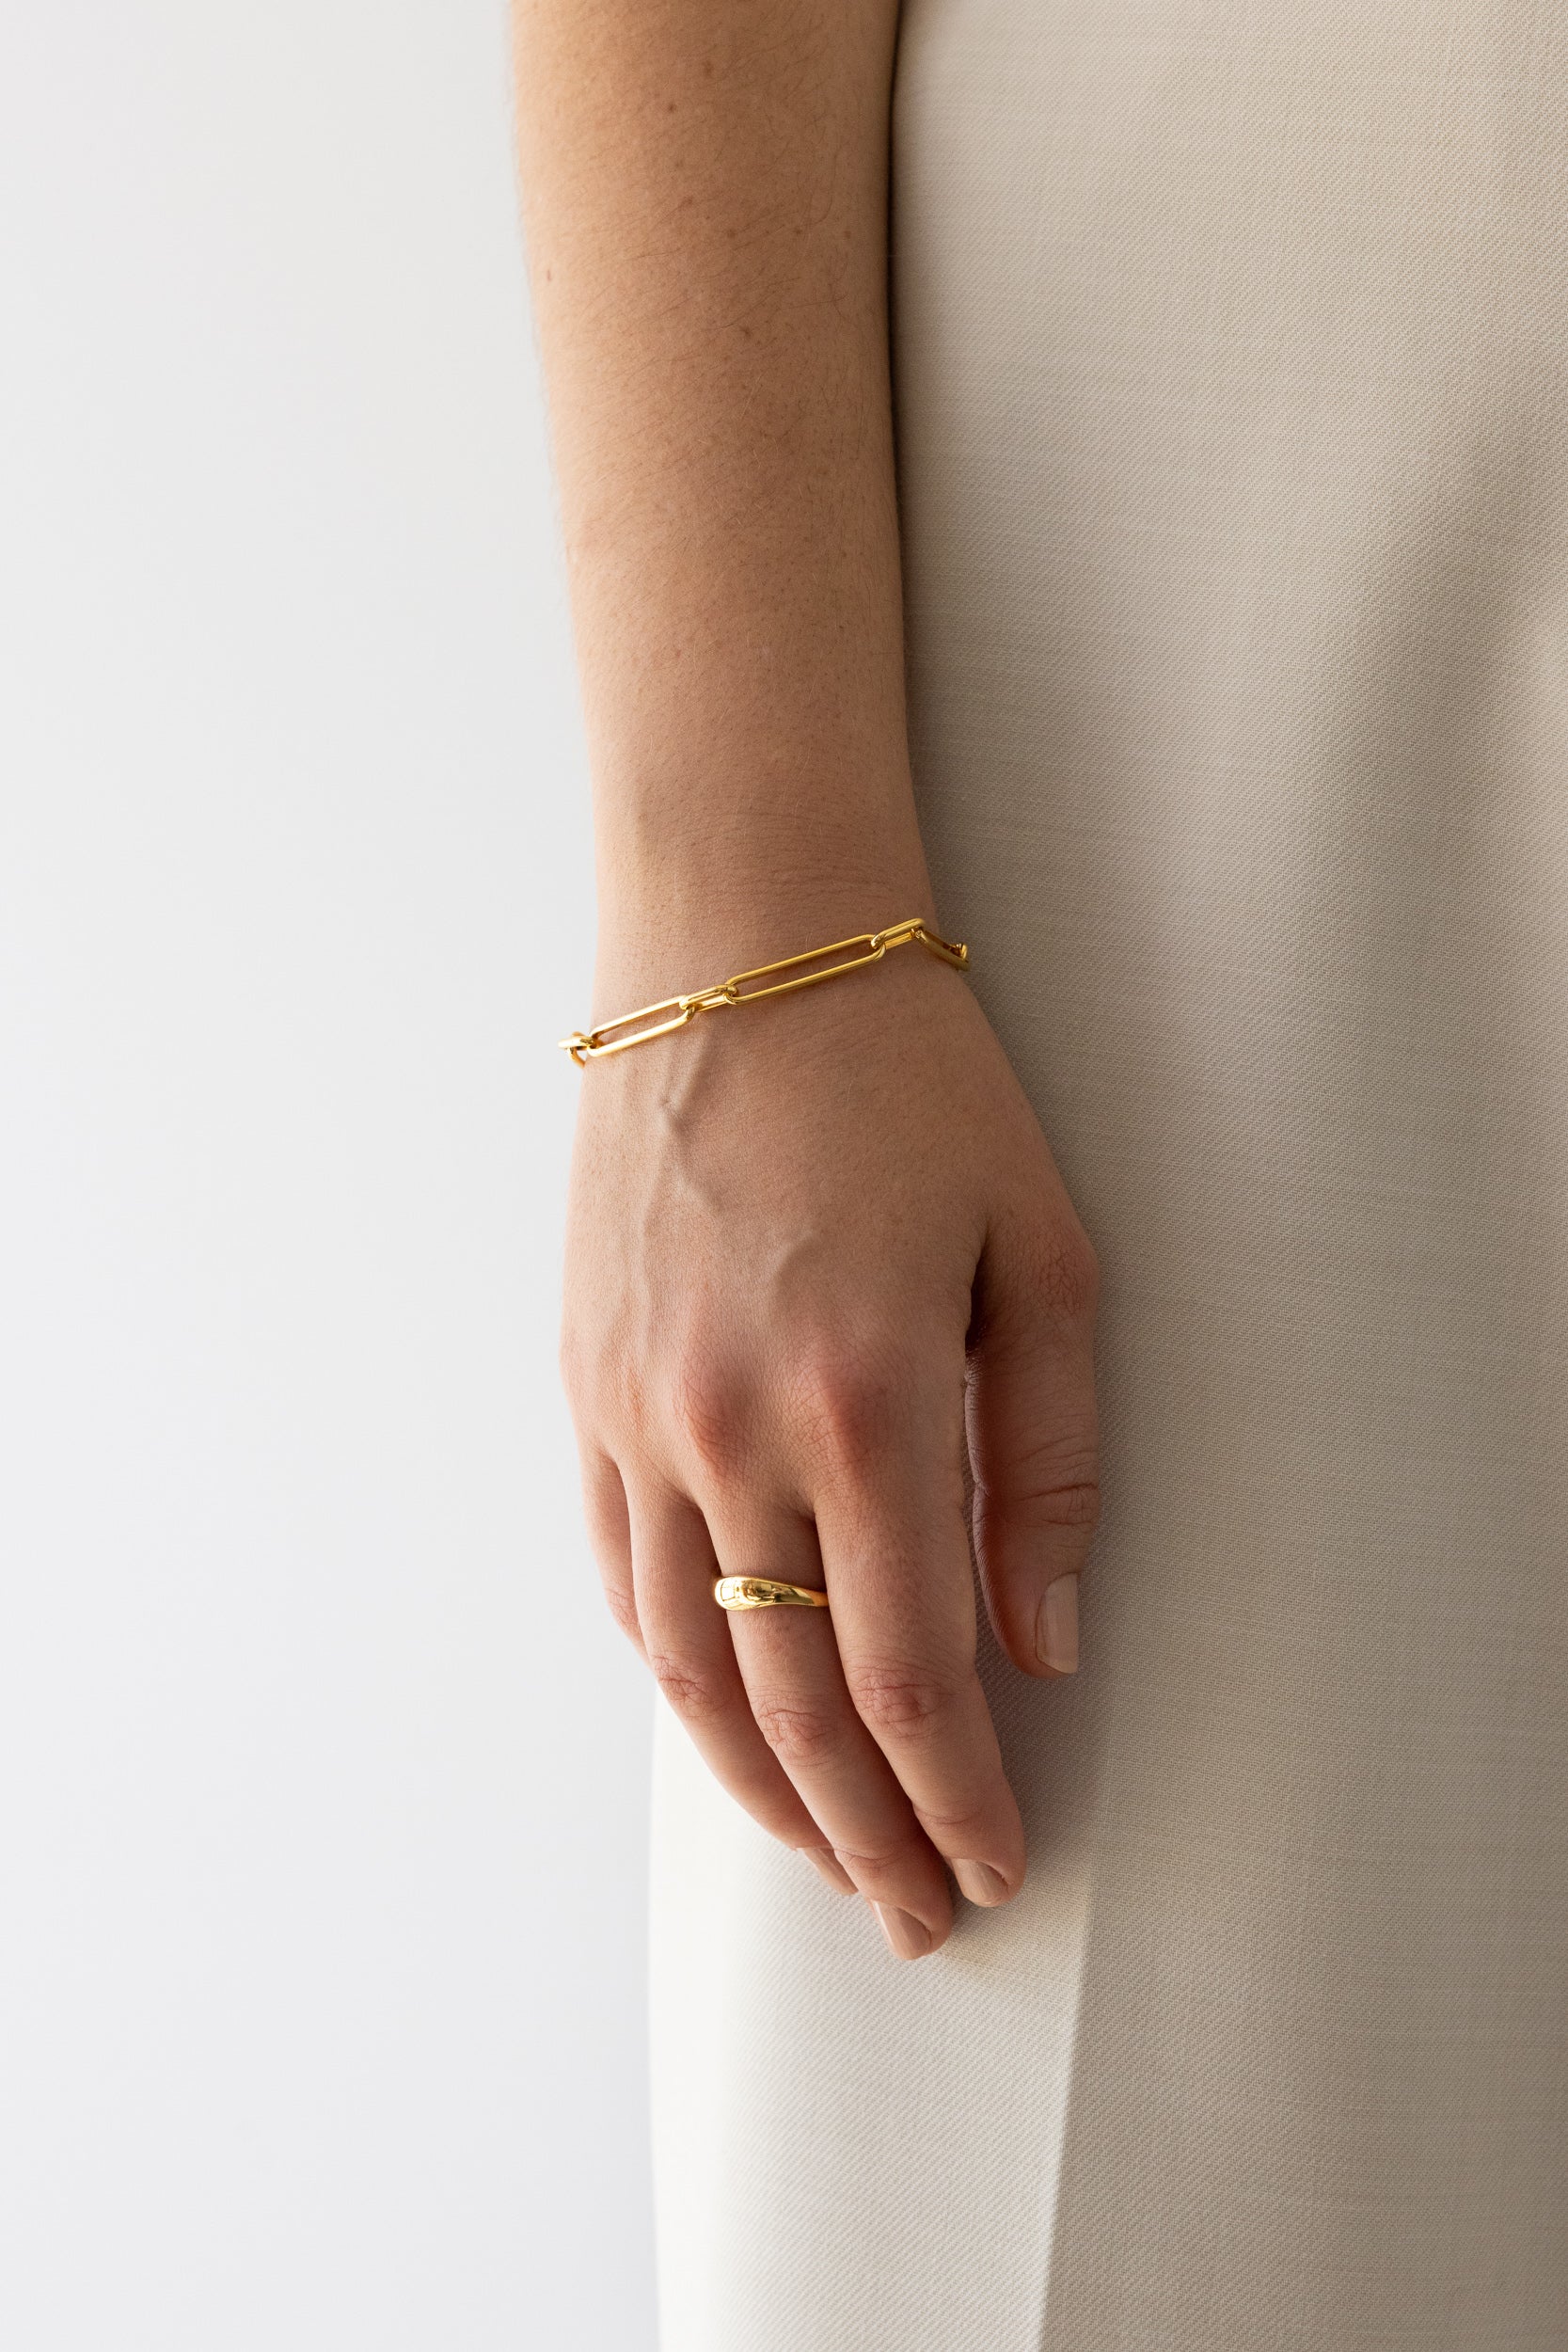 Flash Jewellery Fundamental Ring in 14k Gold Vermeil on model hand by side